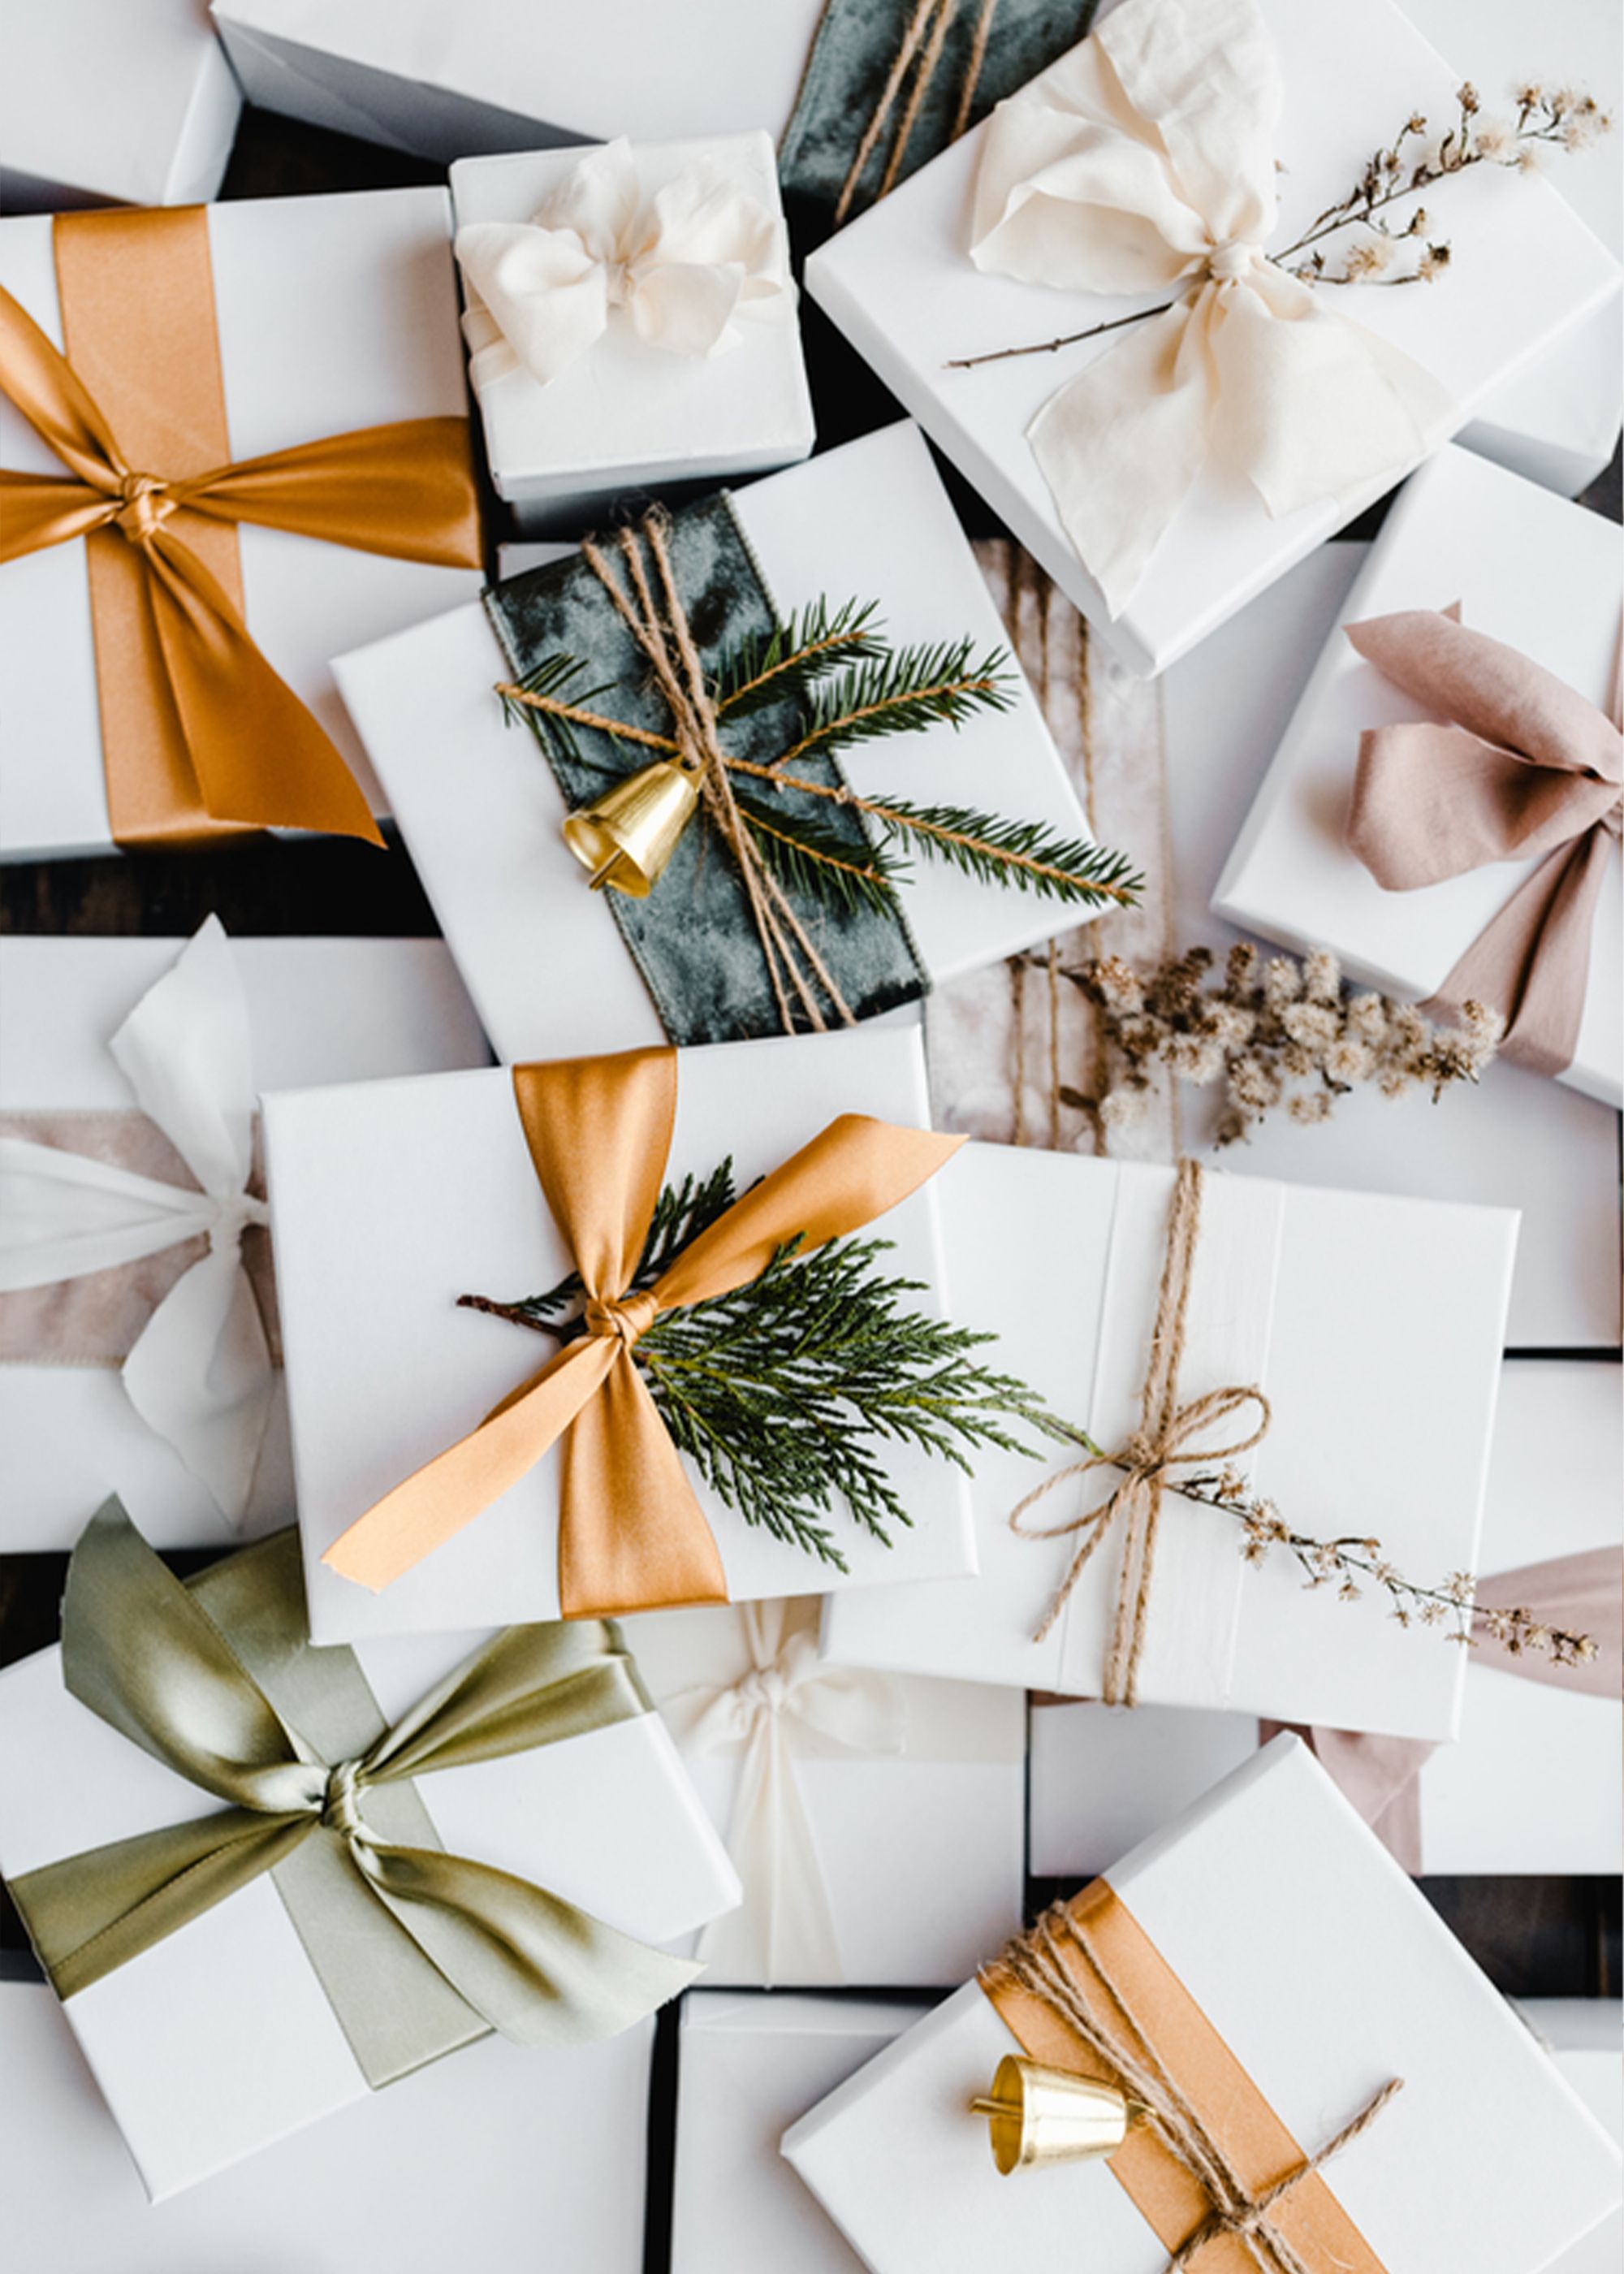 Ultimate Gift Packing Ideas for your loved ones